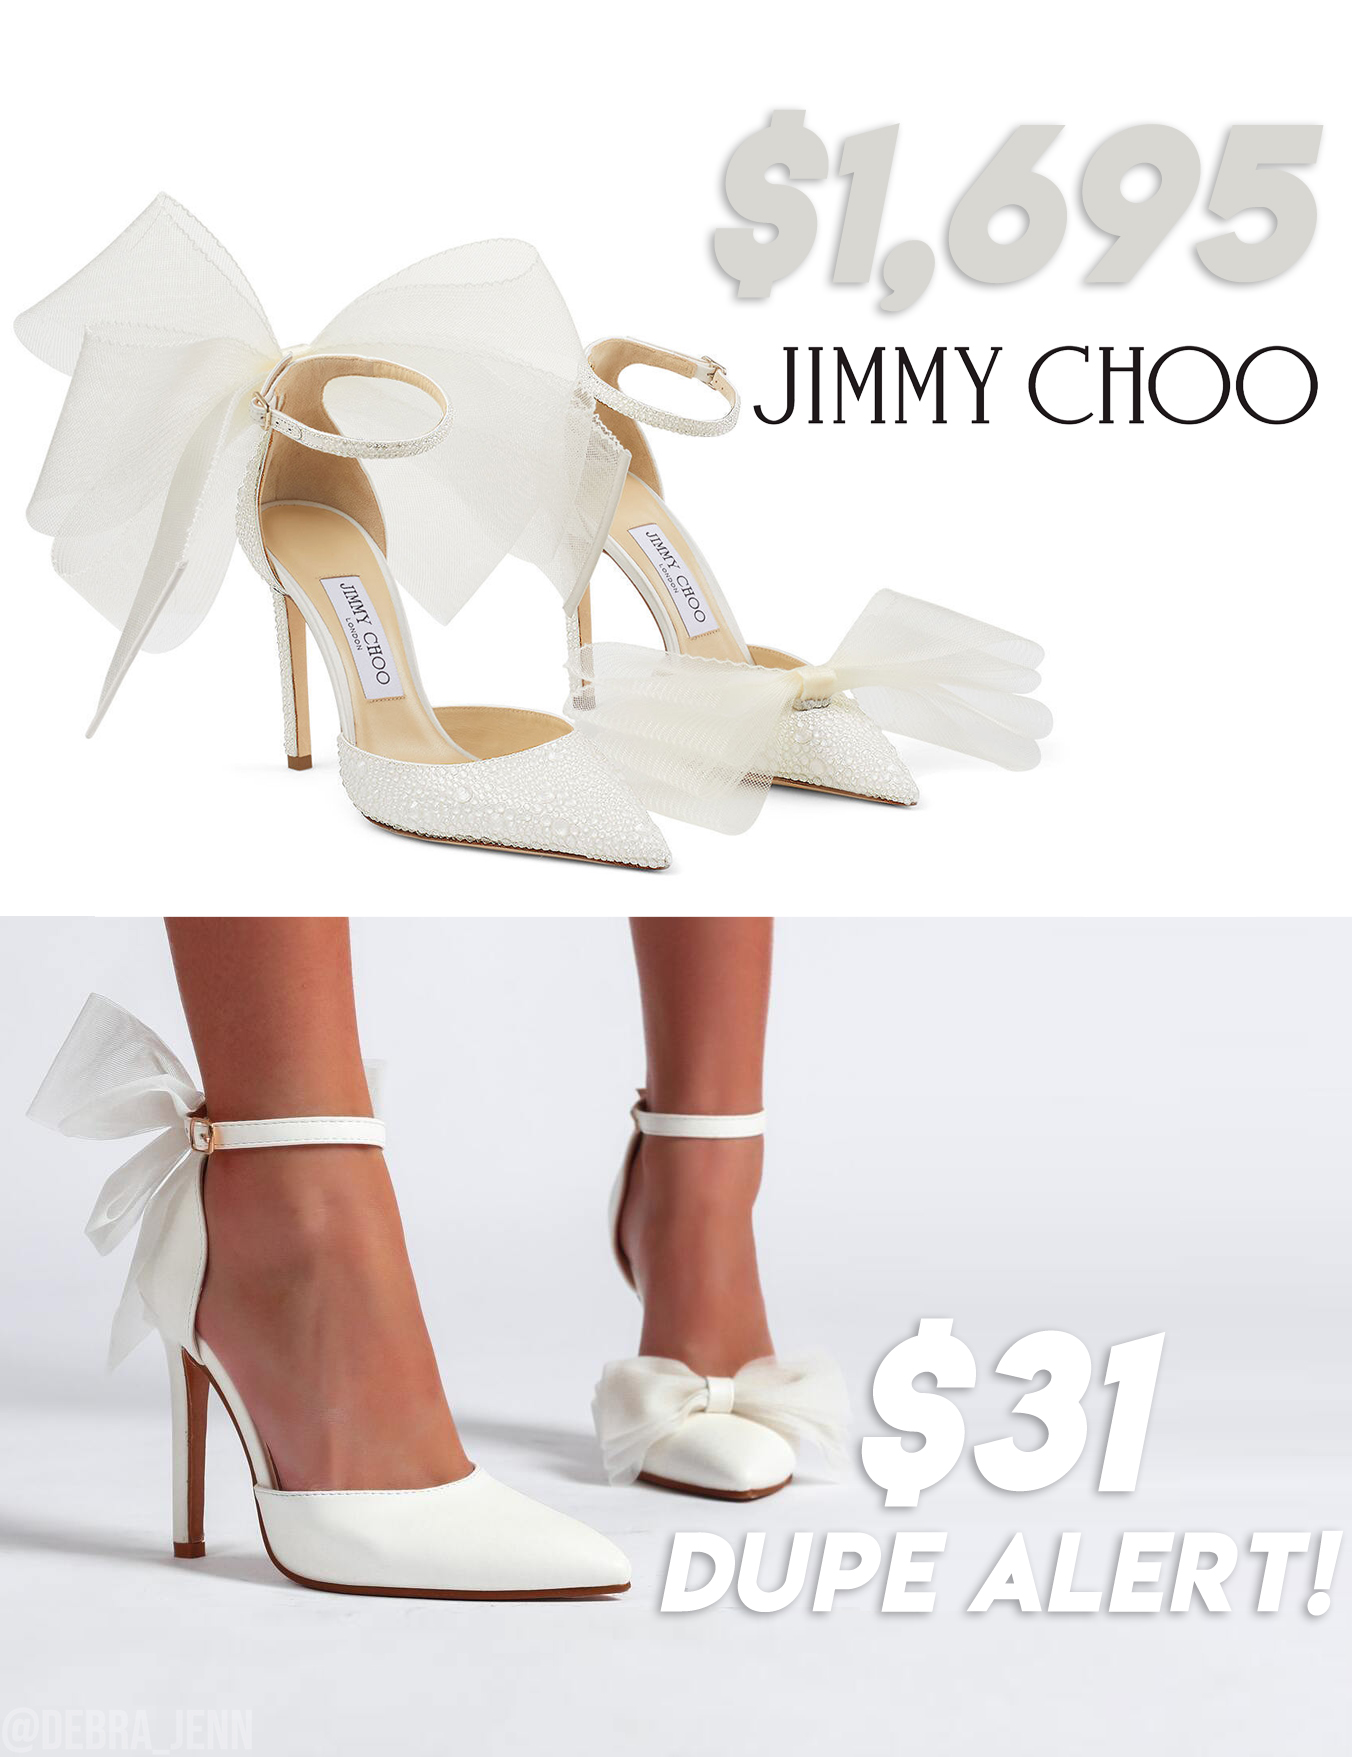 Jimmy Choo launches 40% off sale including perfect bridal styles - Daily  Record